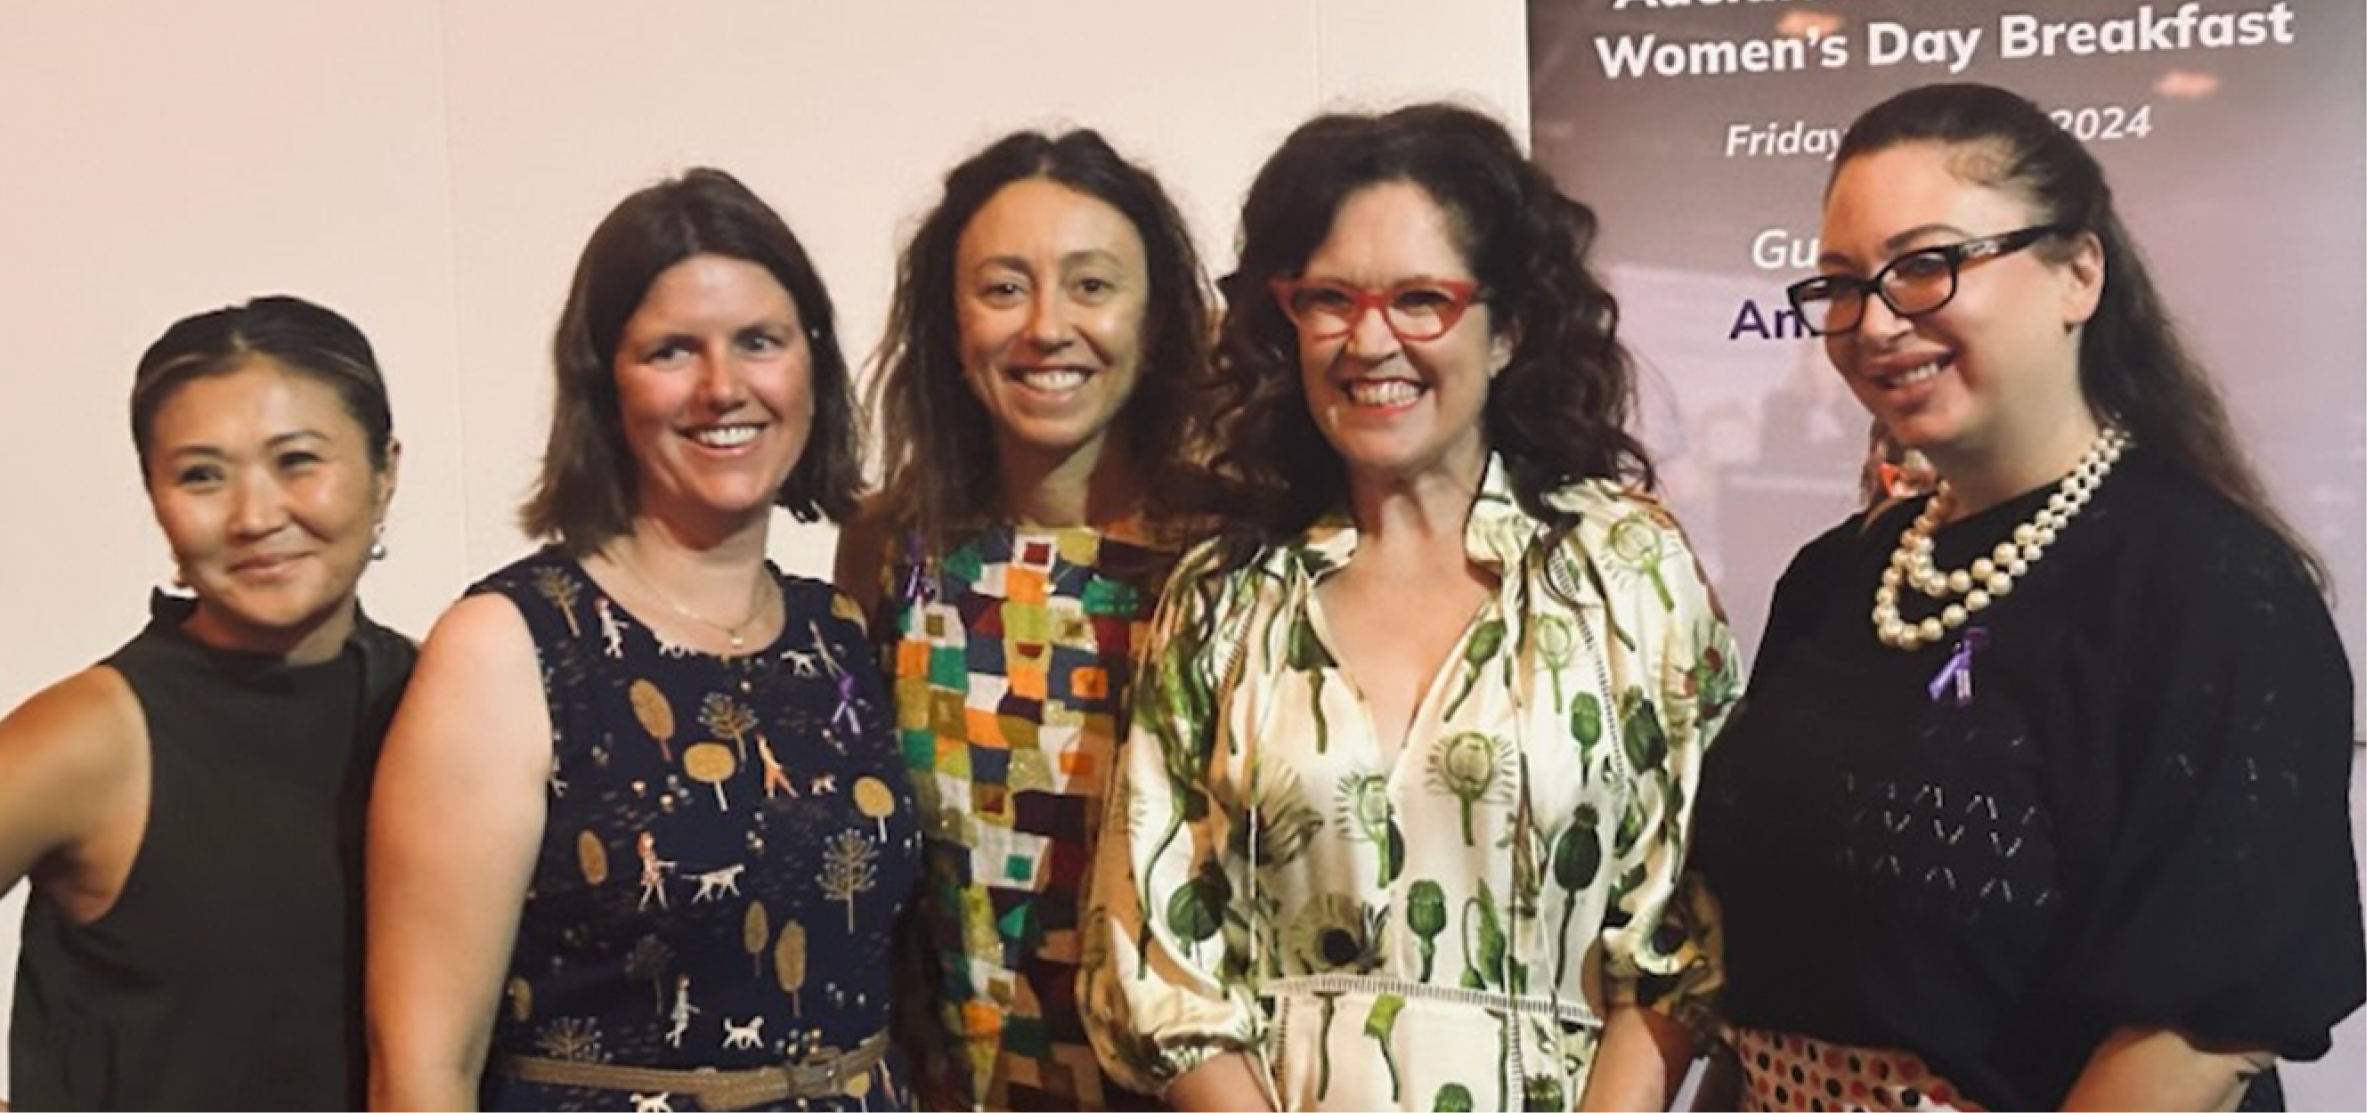 LSA staff with guest speaker Annabel Crabb at the 2024 International Women's Day Breakfast.